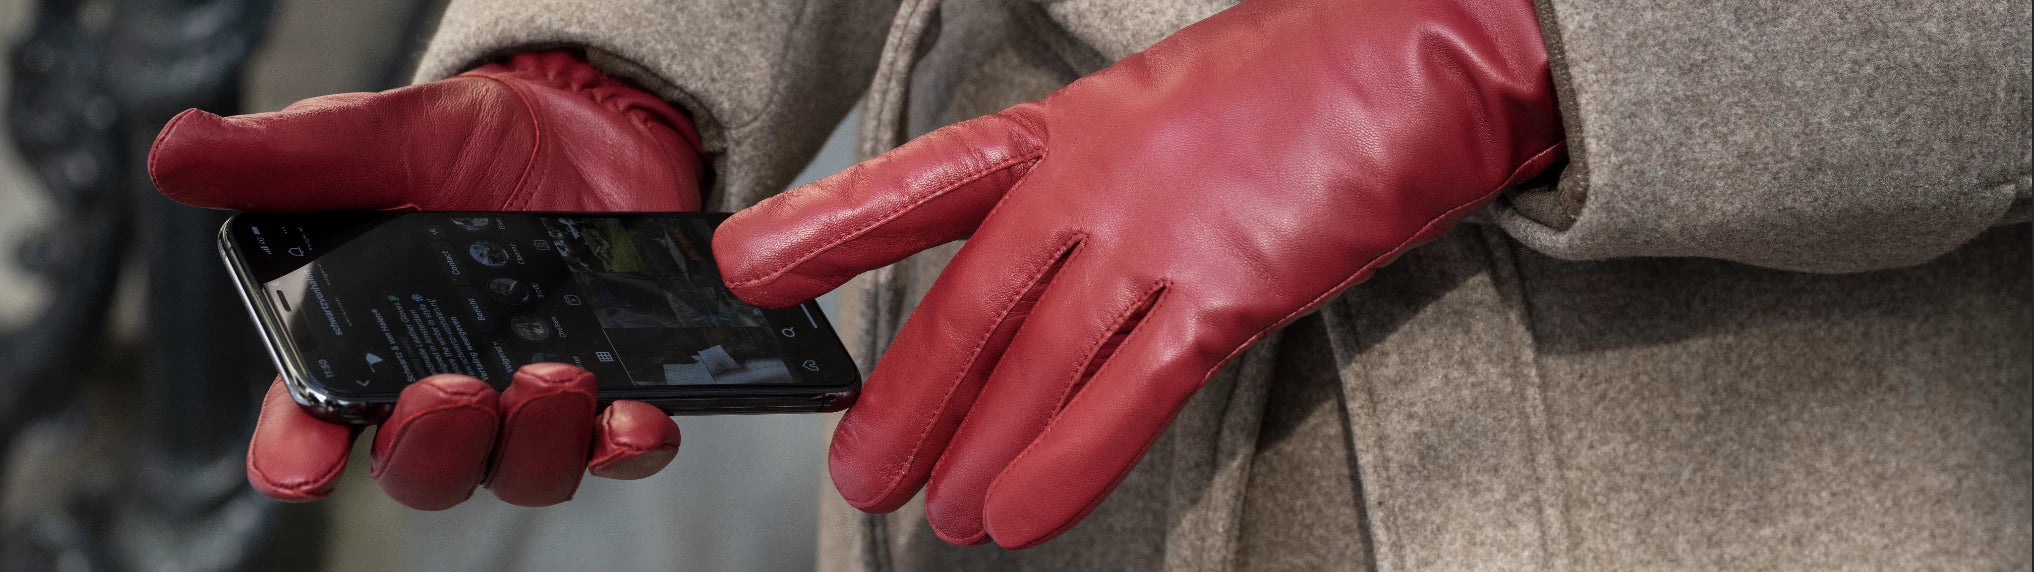 Leather Gloves Touchscreen